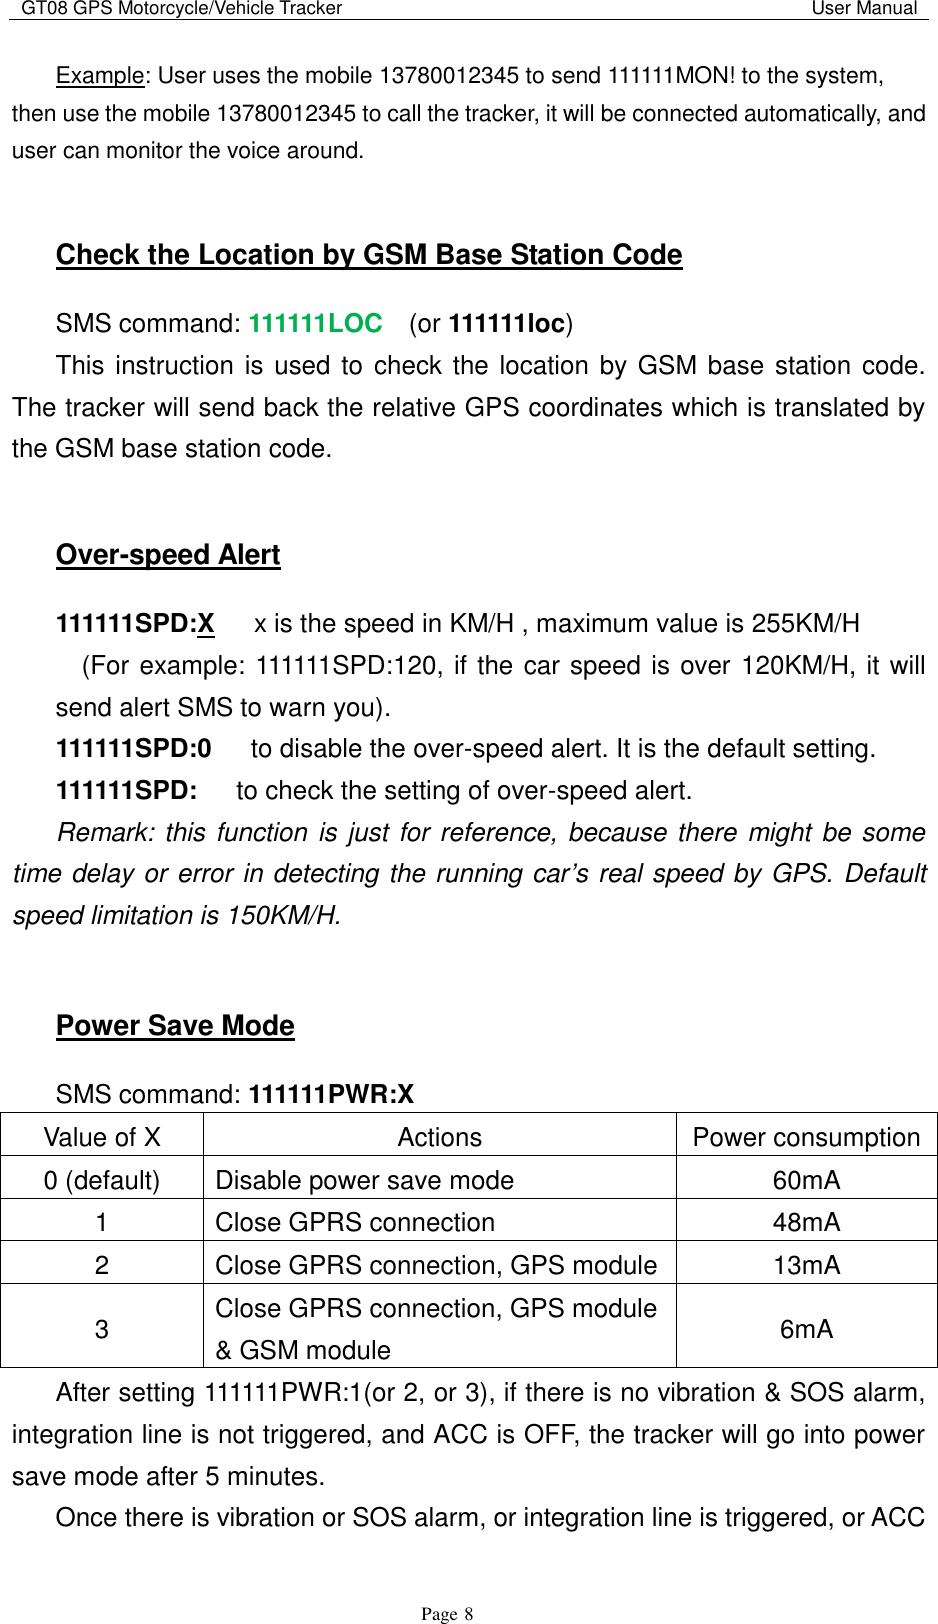 GT08 GPS Motorcycle/Vehicle Tracker                                                                                           User Manual                                     Page   8 Example: User uses the mobile 13780012345 to send 111111MON! to the system, then use the mobile 13780012345 to call the tracker, it will be connected automatically, and user can monitor the voice around.  Check the Location by GSM Base Station Code SMS command: 111111LOC  (or 111111loc) This instruction is used to  check the location by GSM base station code. The tracker will send back the relative GPS coordinates which is translated by the GSM base station code.  Over-speed Alert 111111SPD:X   x is the speed in KM/H , maximum value is 255KM/H       (For example: 111111SPD:120, if the car speed is over 120KM/H, it will send alert SMS to warn you). 111111SPD:0    to disable the over-speed alert. It is the default setting. 111111SPD:    to check the setting of over-speed alert. Remark: this function is just for reference, because there might be some time delay or error in detecting the running car’s real speed by GPS. Default speed limitation is 150KM/H.  Power Save Mode SMS command: 111111PWR:X Value of X Actions Power consumption 0 (default) Disable power save mode 60mA 1 Close GPRS connection 48mA 2 Close GPRS connection, GPS module 13mA 3 Close GPRS connection, GPS module &amp; GSM module 6mA After setting 111111PWR:1(or 2, or 3), if there is no vibration &amp; SOS alarm, integration line is not triggered, and ACC is OFF, the tracker will go into power save mode after 5 minutes. Once there is vibration or SOS alarm, or integration line is triggered, or ACC 